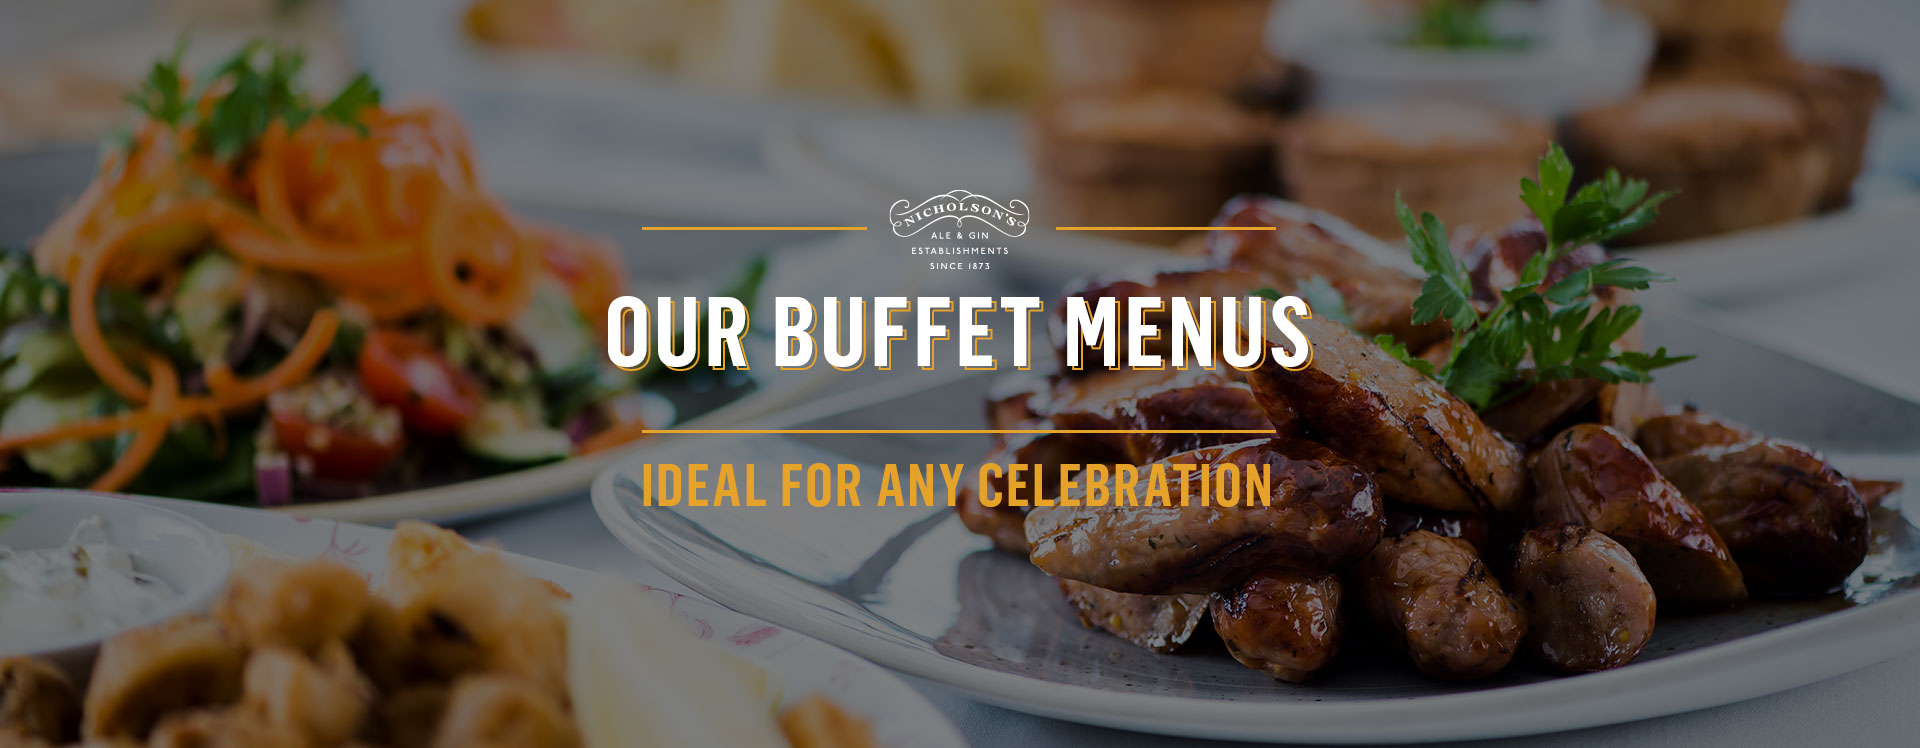 Buffet menu at The Old Contemptibles - Book a table